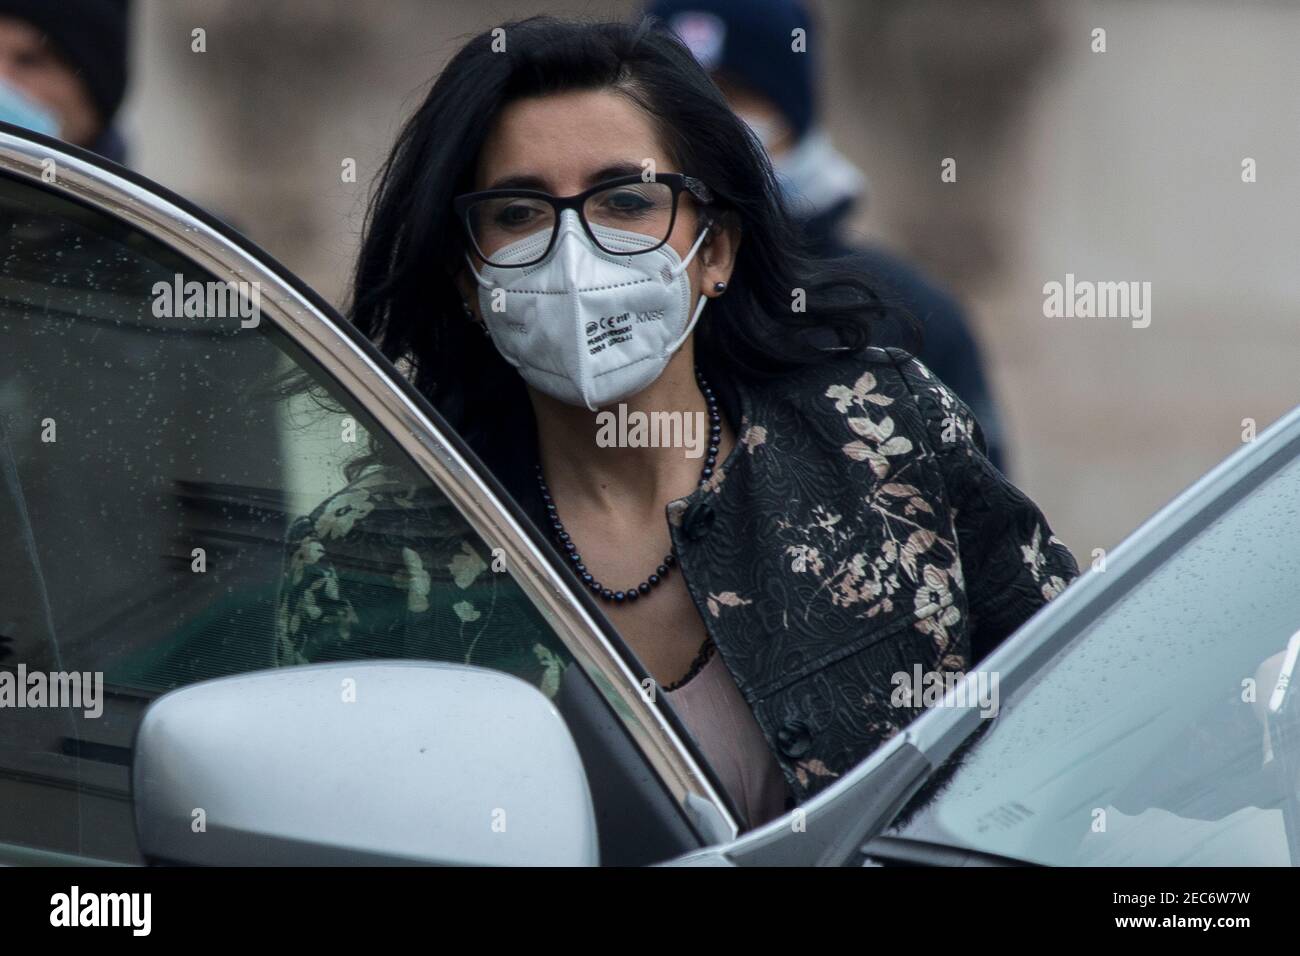 Rome, Italy. 13th Feb, 2021. Fabiana Dadone, Minister for Youth Policies. The new Italian Government, lead by Professor and former President of the European Central Bank Mario Draghi, leaves the Quirinale Palace after swearing in front of the President of the Italian Republic, Sergio Mattarella. This is the 67th Government of Italy. Credit: LSF Photo/Alamy Live News Stock Photo